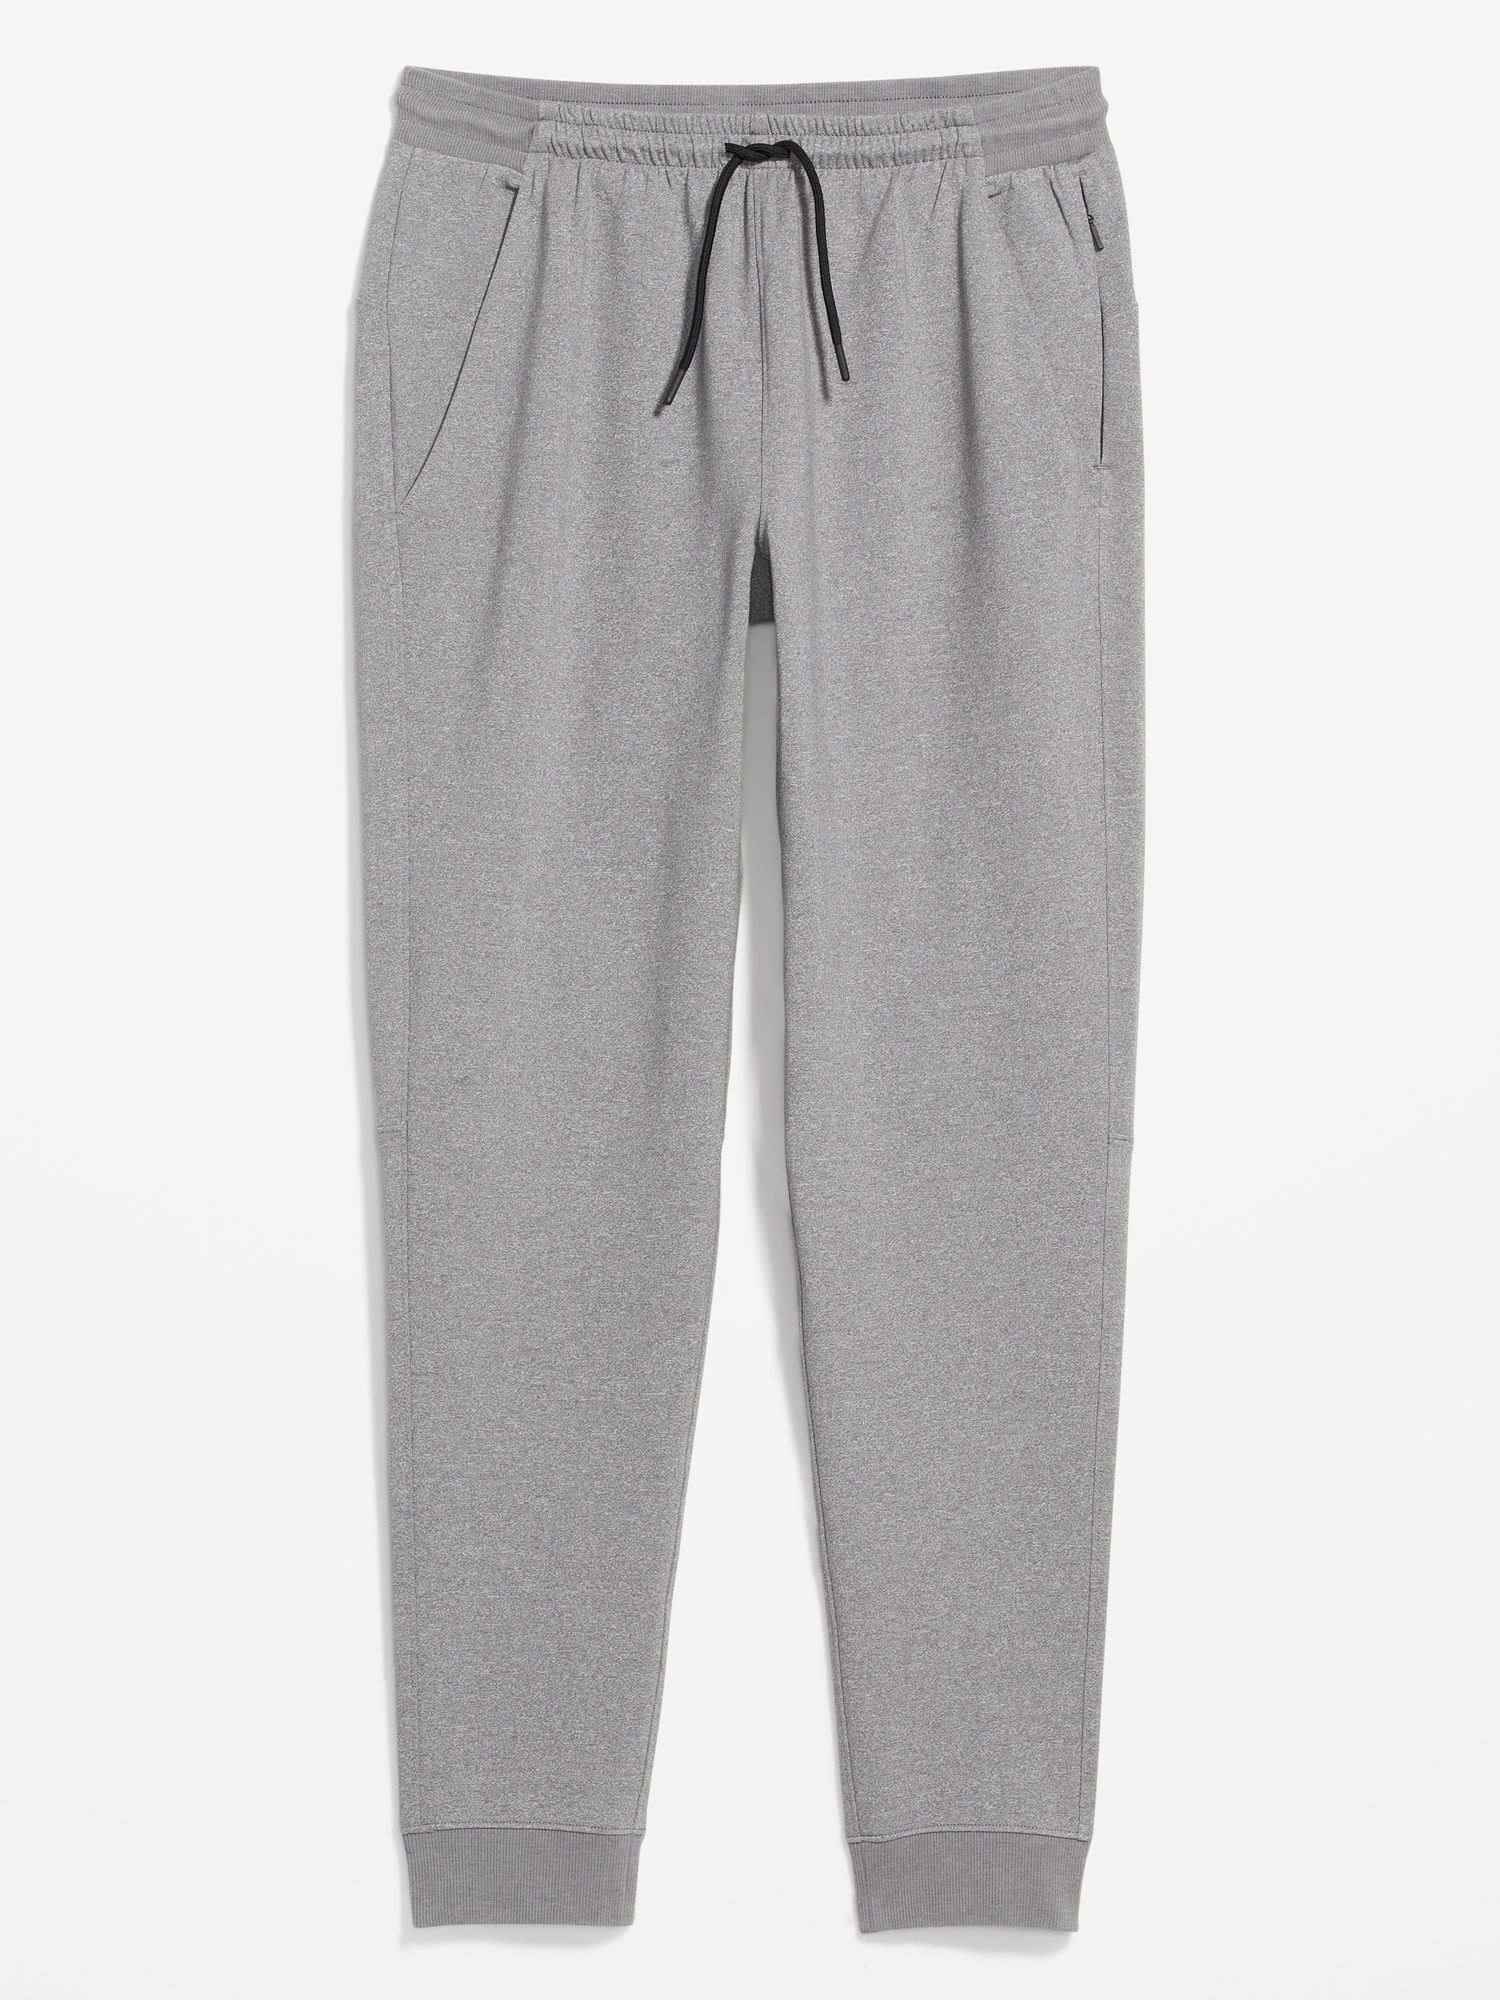 Old Navy Active Joggers - Athleta Dupe Gray - $20 (50% Off Retail